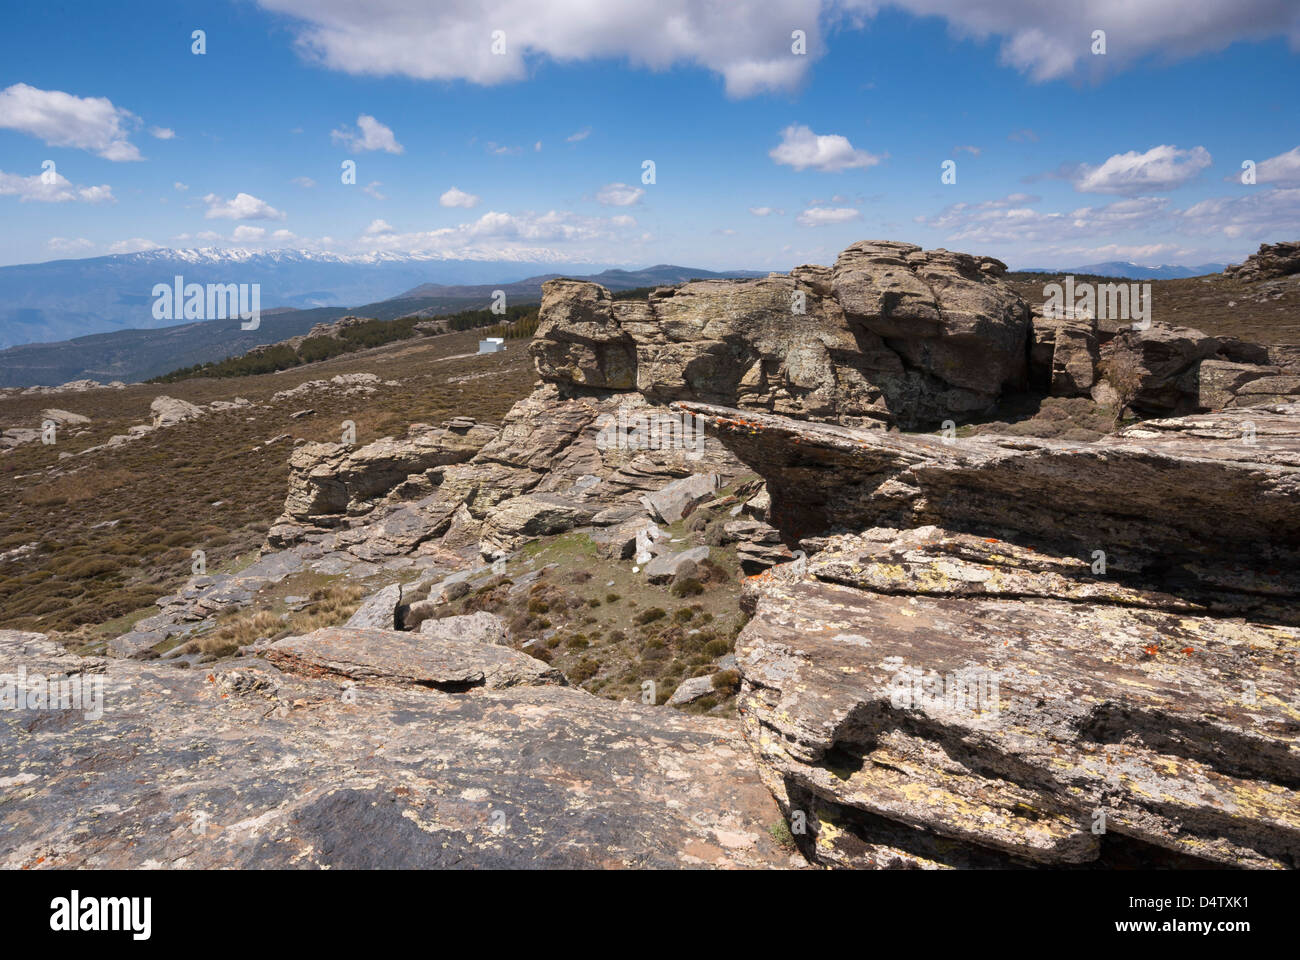 View of the Sierra Navada from the Calar Alto Observatory, Sierra de los Filibres, Spain Stock Photo